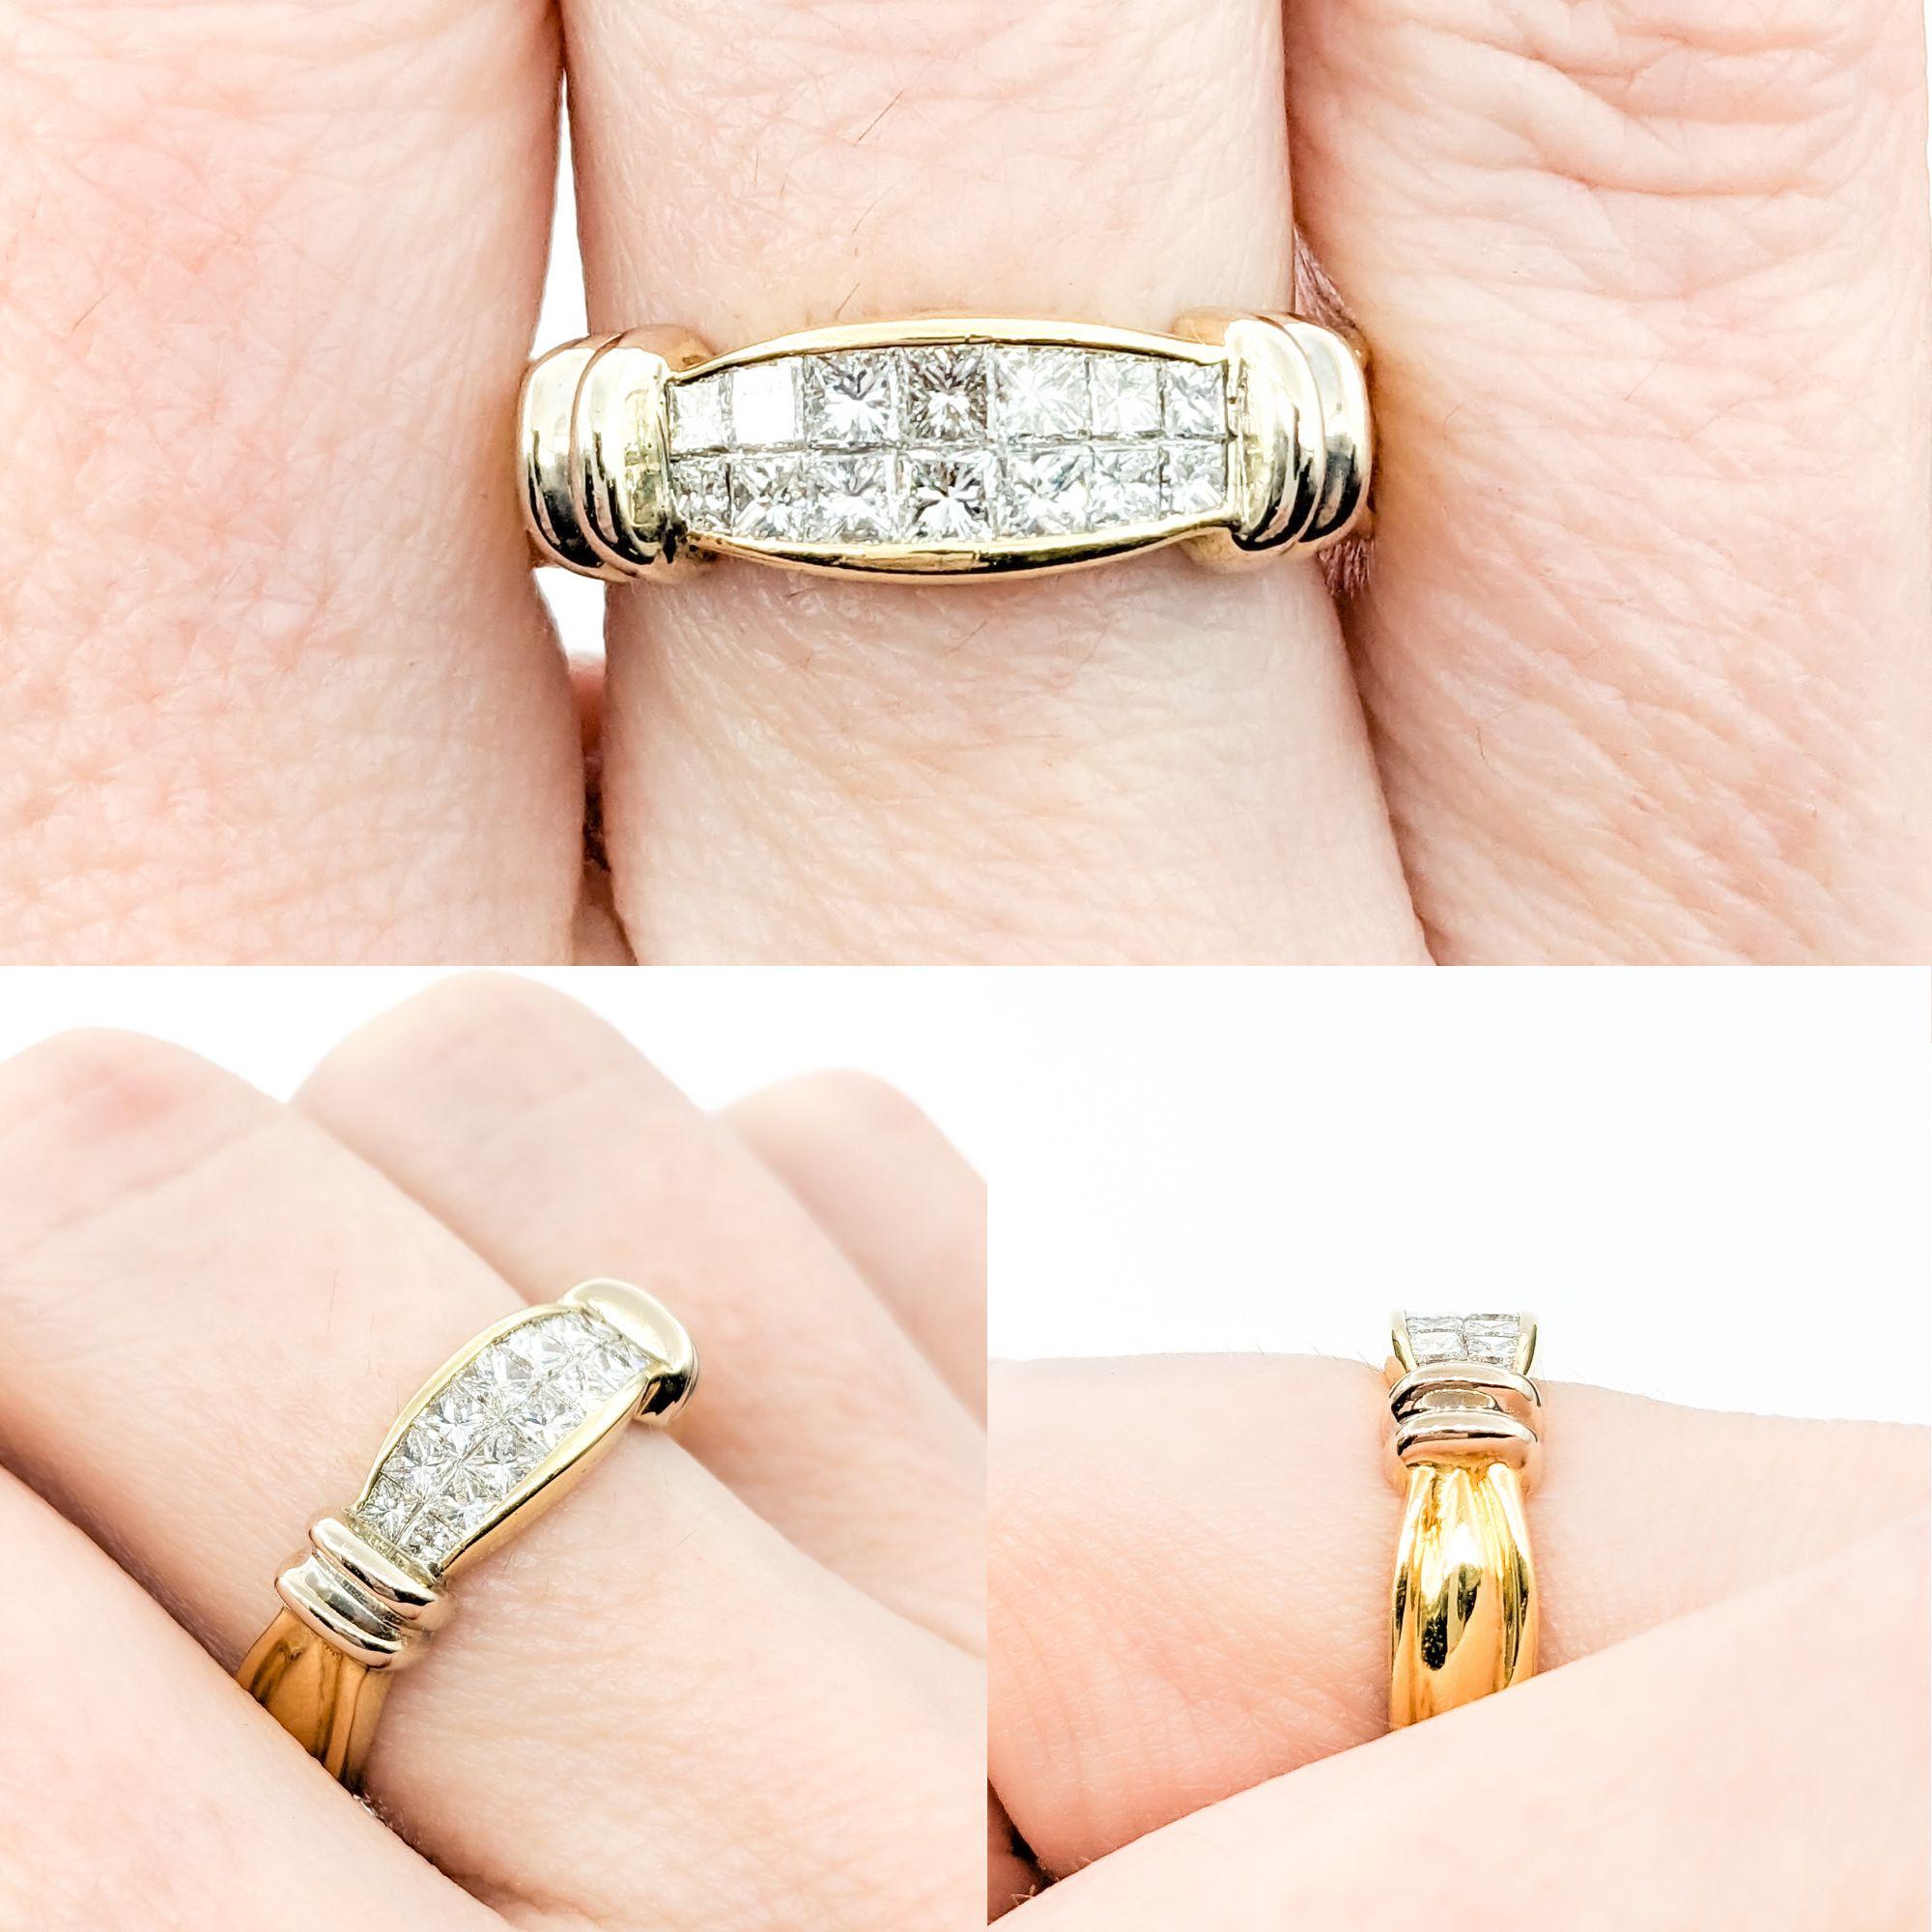 18kt Yellow Gold Ring With Invisible Set Diamonds

Introducing this stunning ring crafted in 18k yellow gold, featuring .42ctw of princess-cut diamonds. These diamonds are of SI1-SI2 clarity and H color, adding a brilliant sparkle. The elegant piece